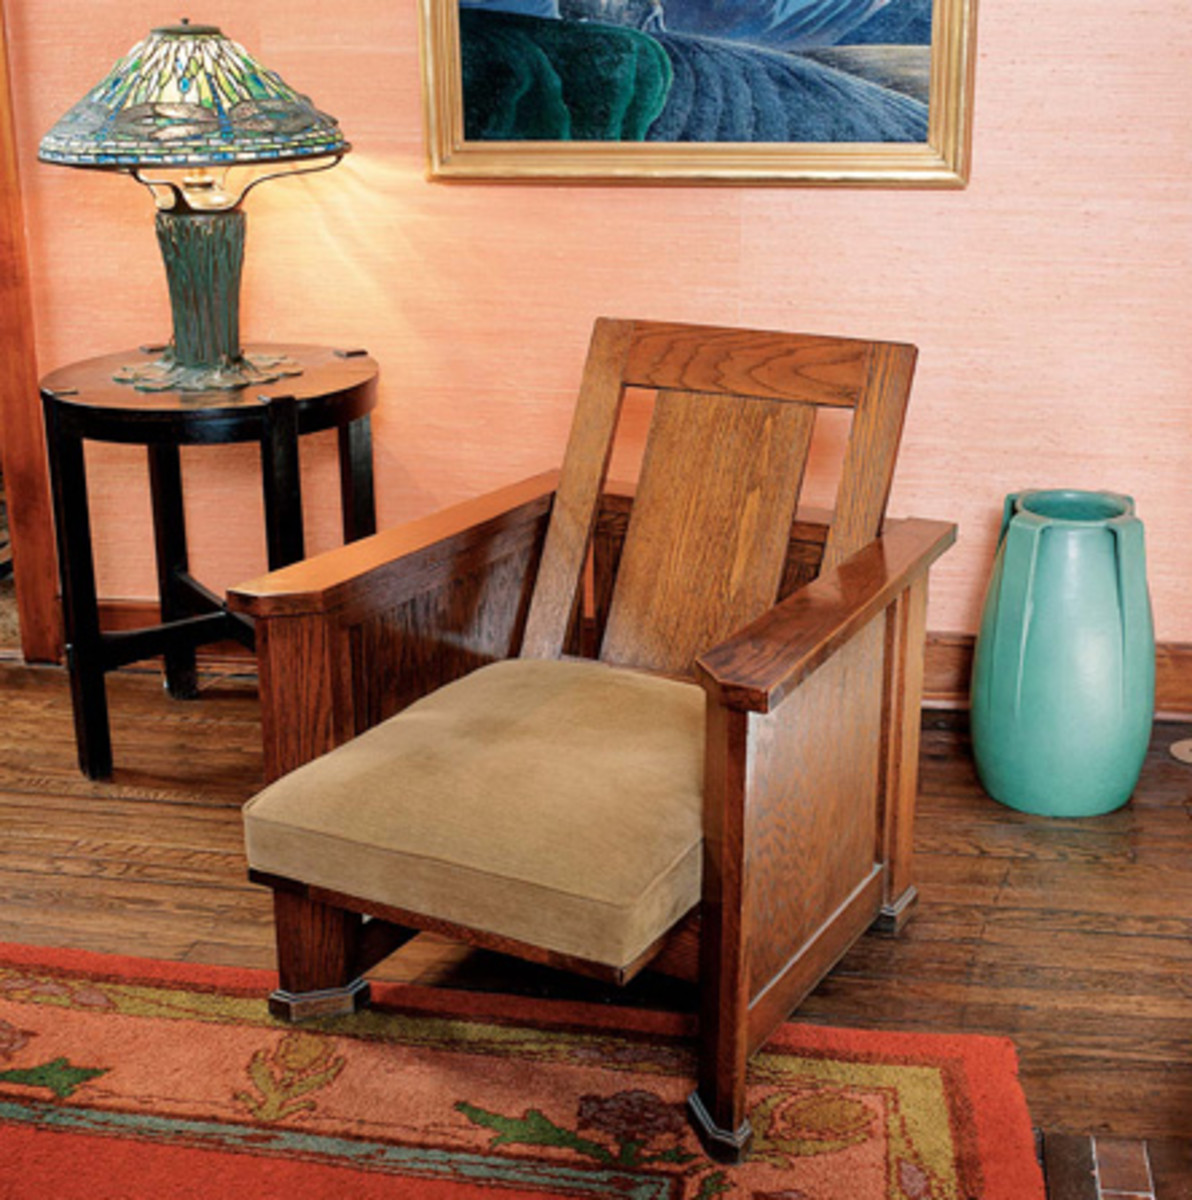 Frank Lloyd Wright’s version translated the Morris chair to a Prairie School form.